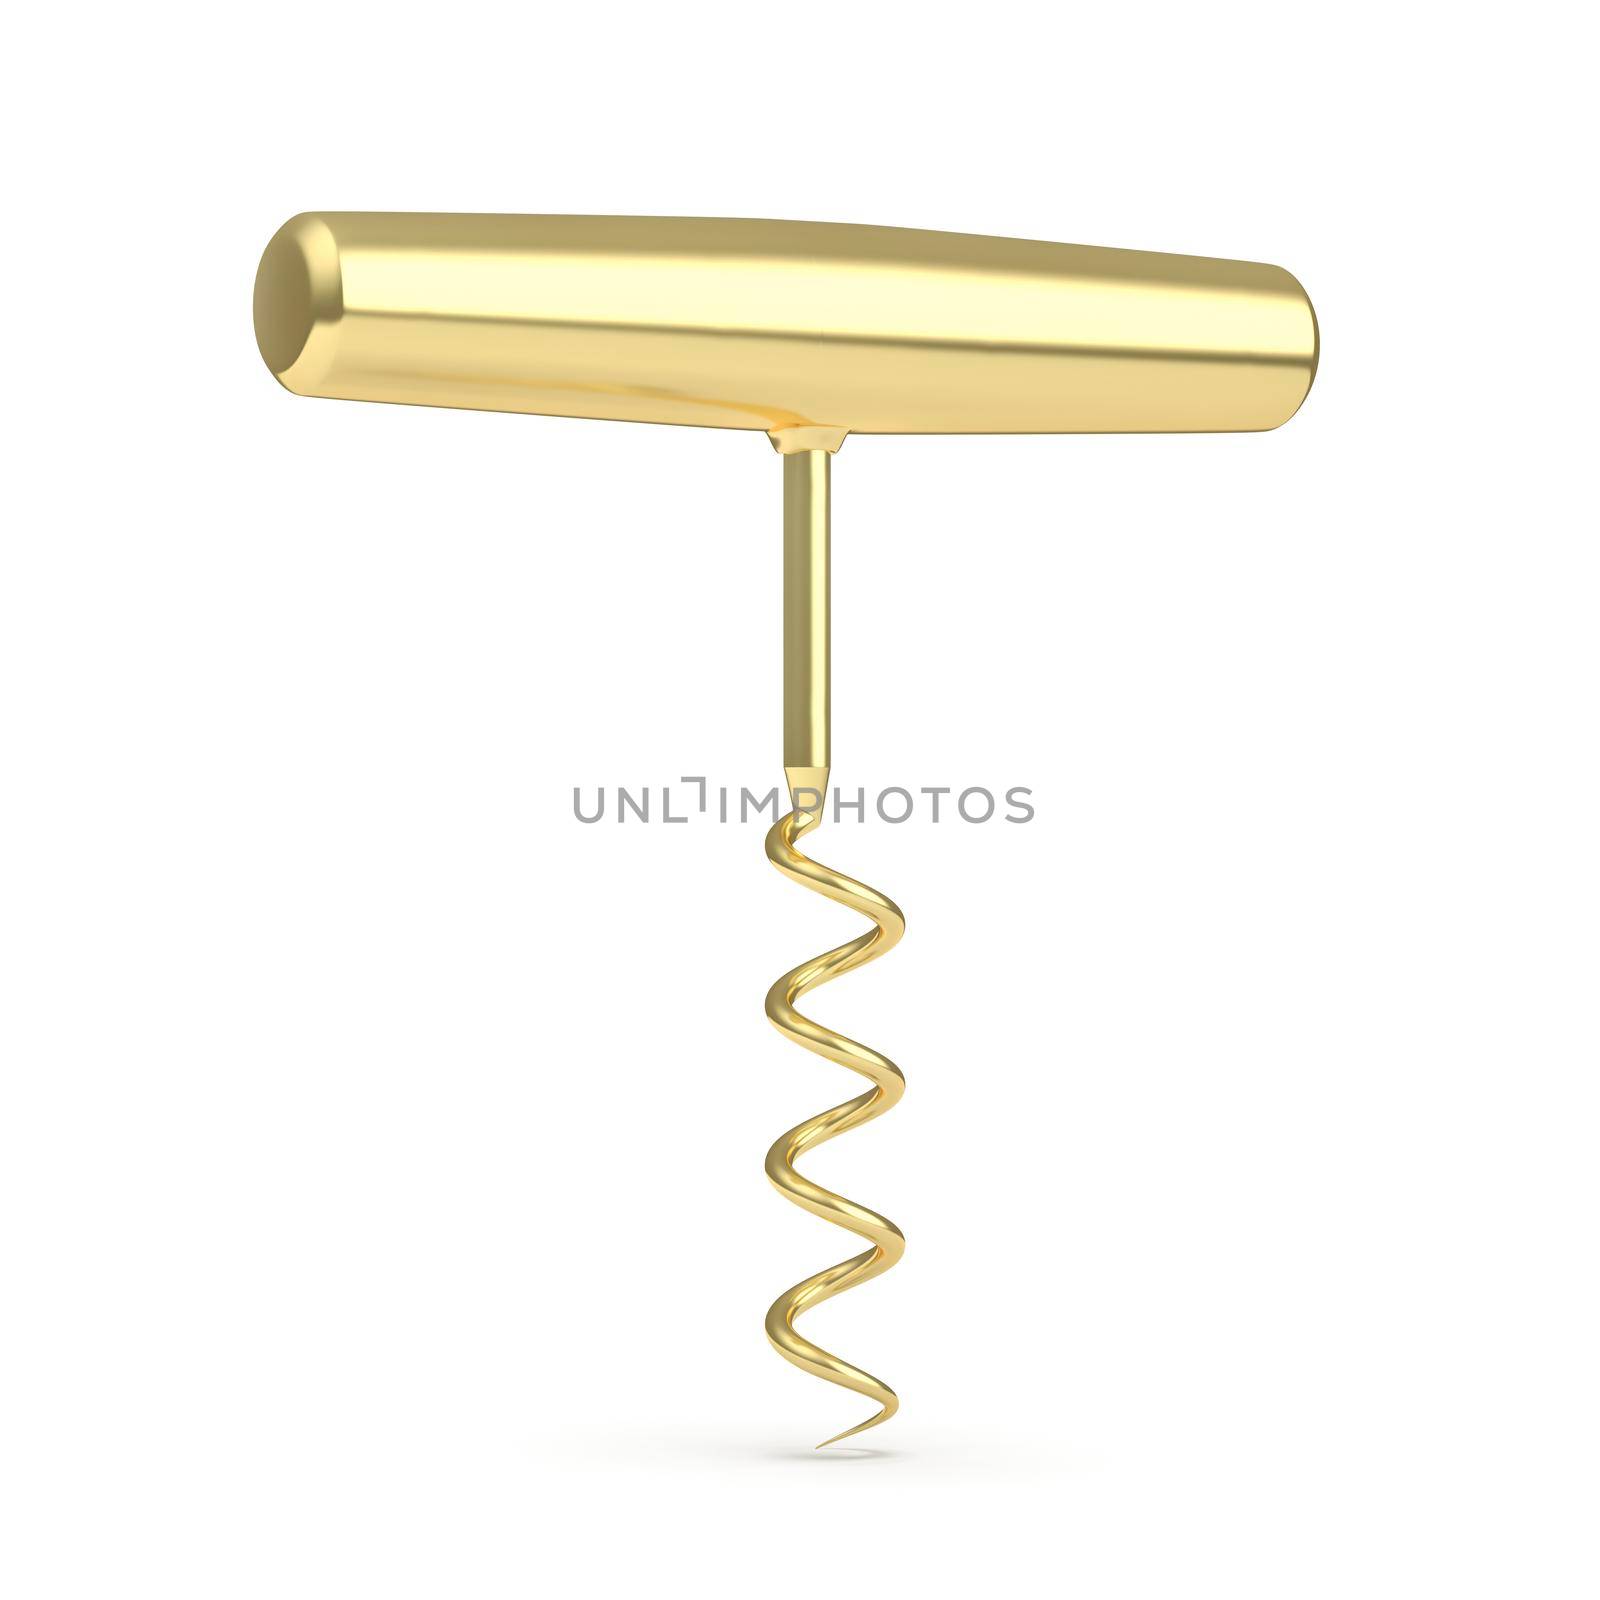 Shiny golden corkscrew by magraphics